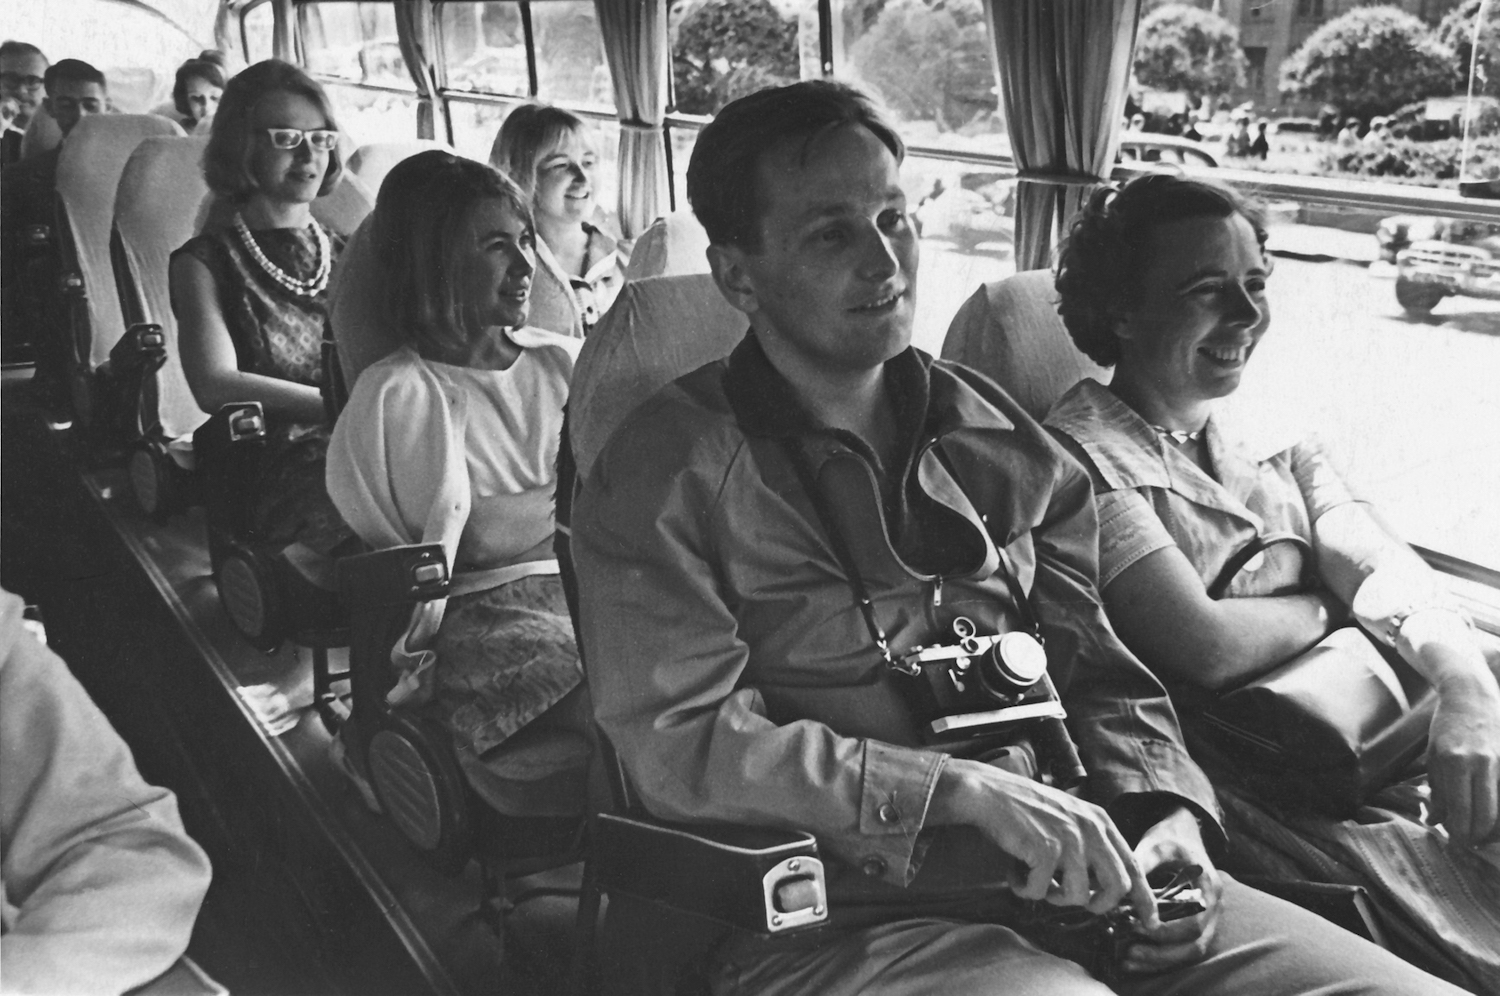 Finnish tourists in a tour bus in Leningrad